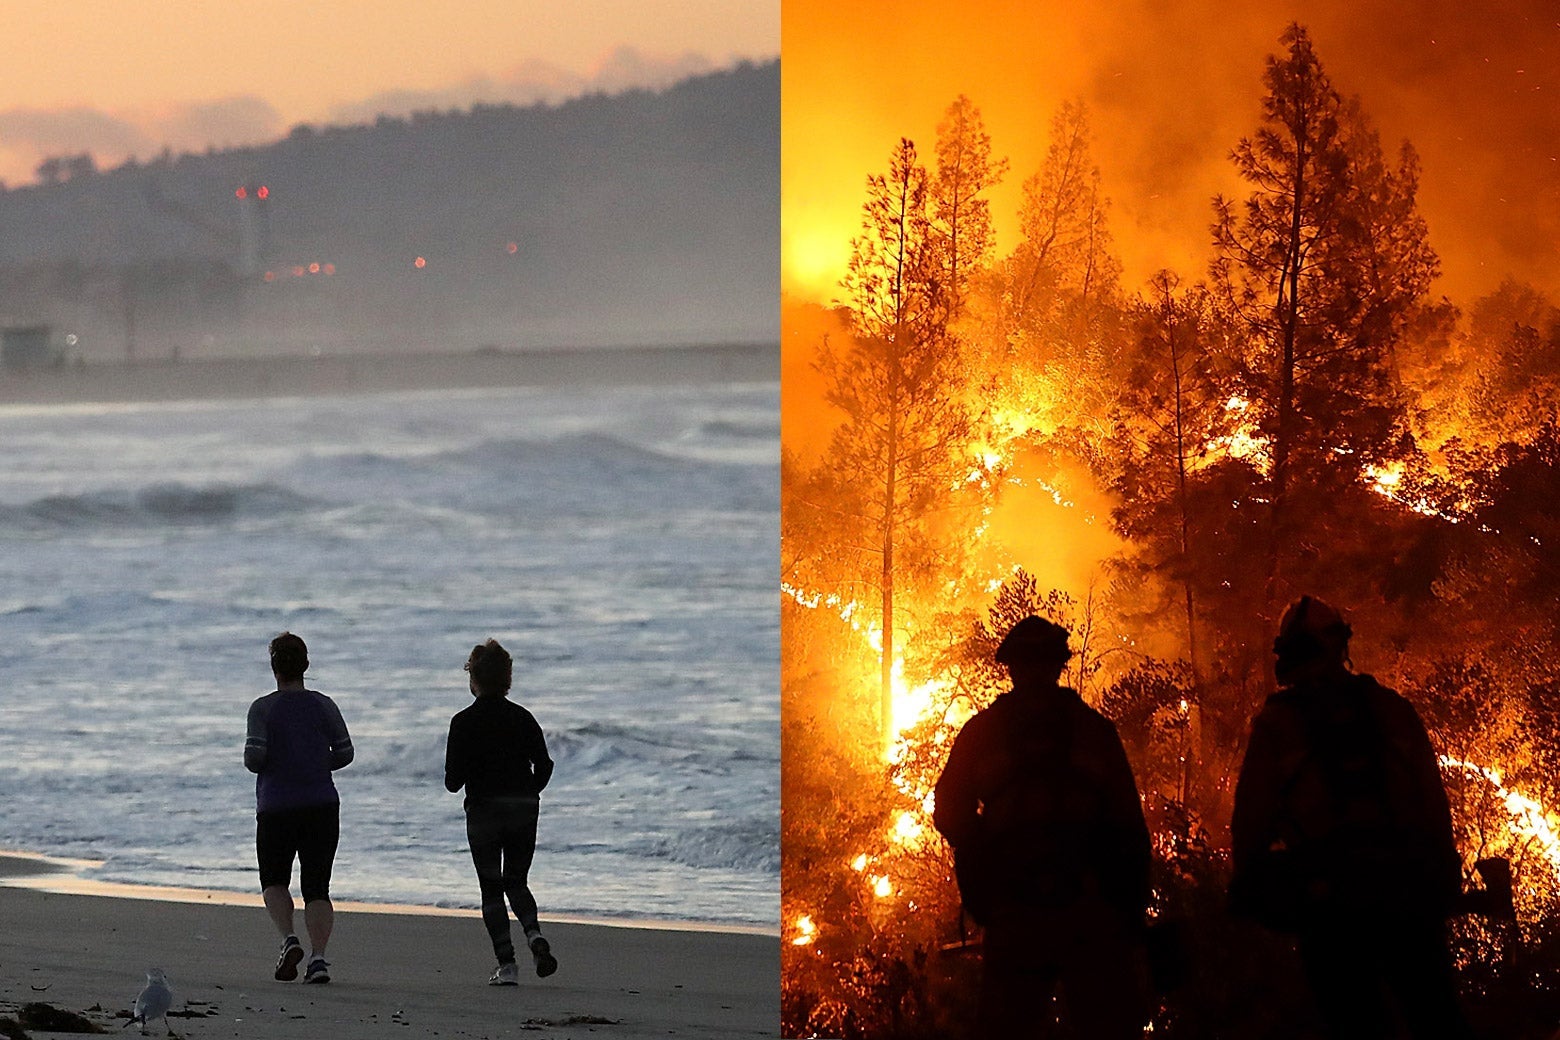 On the left, a man and a woman jog on a beach. On the right, a firefighters battle a blaze.